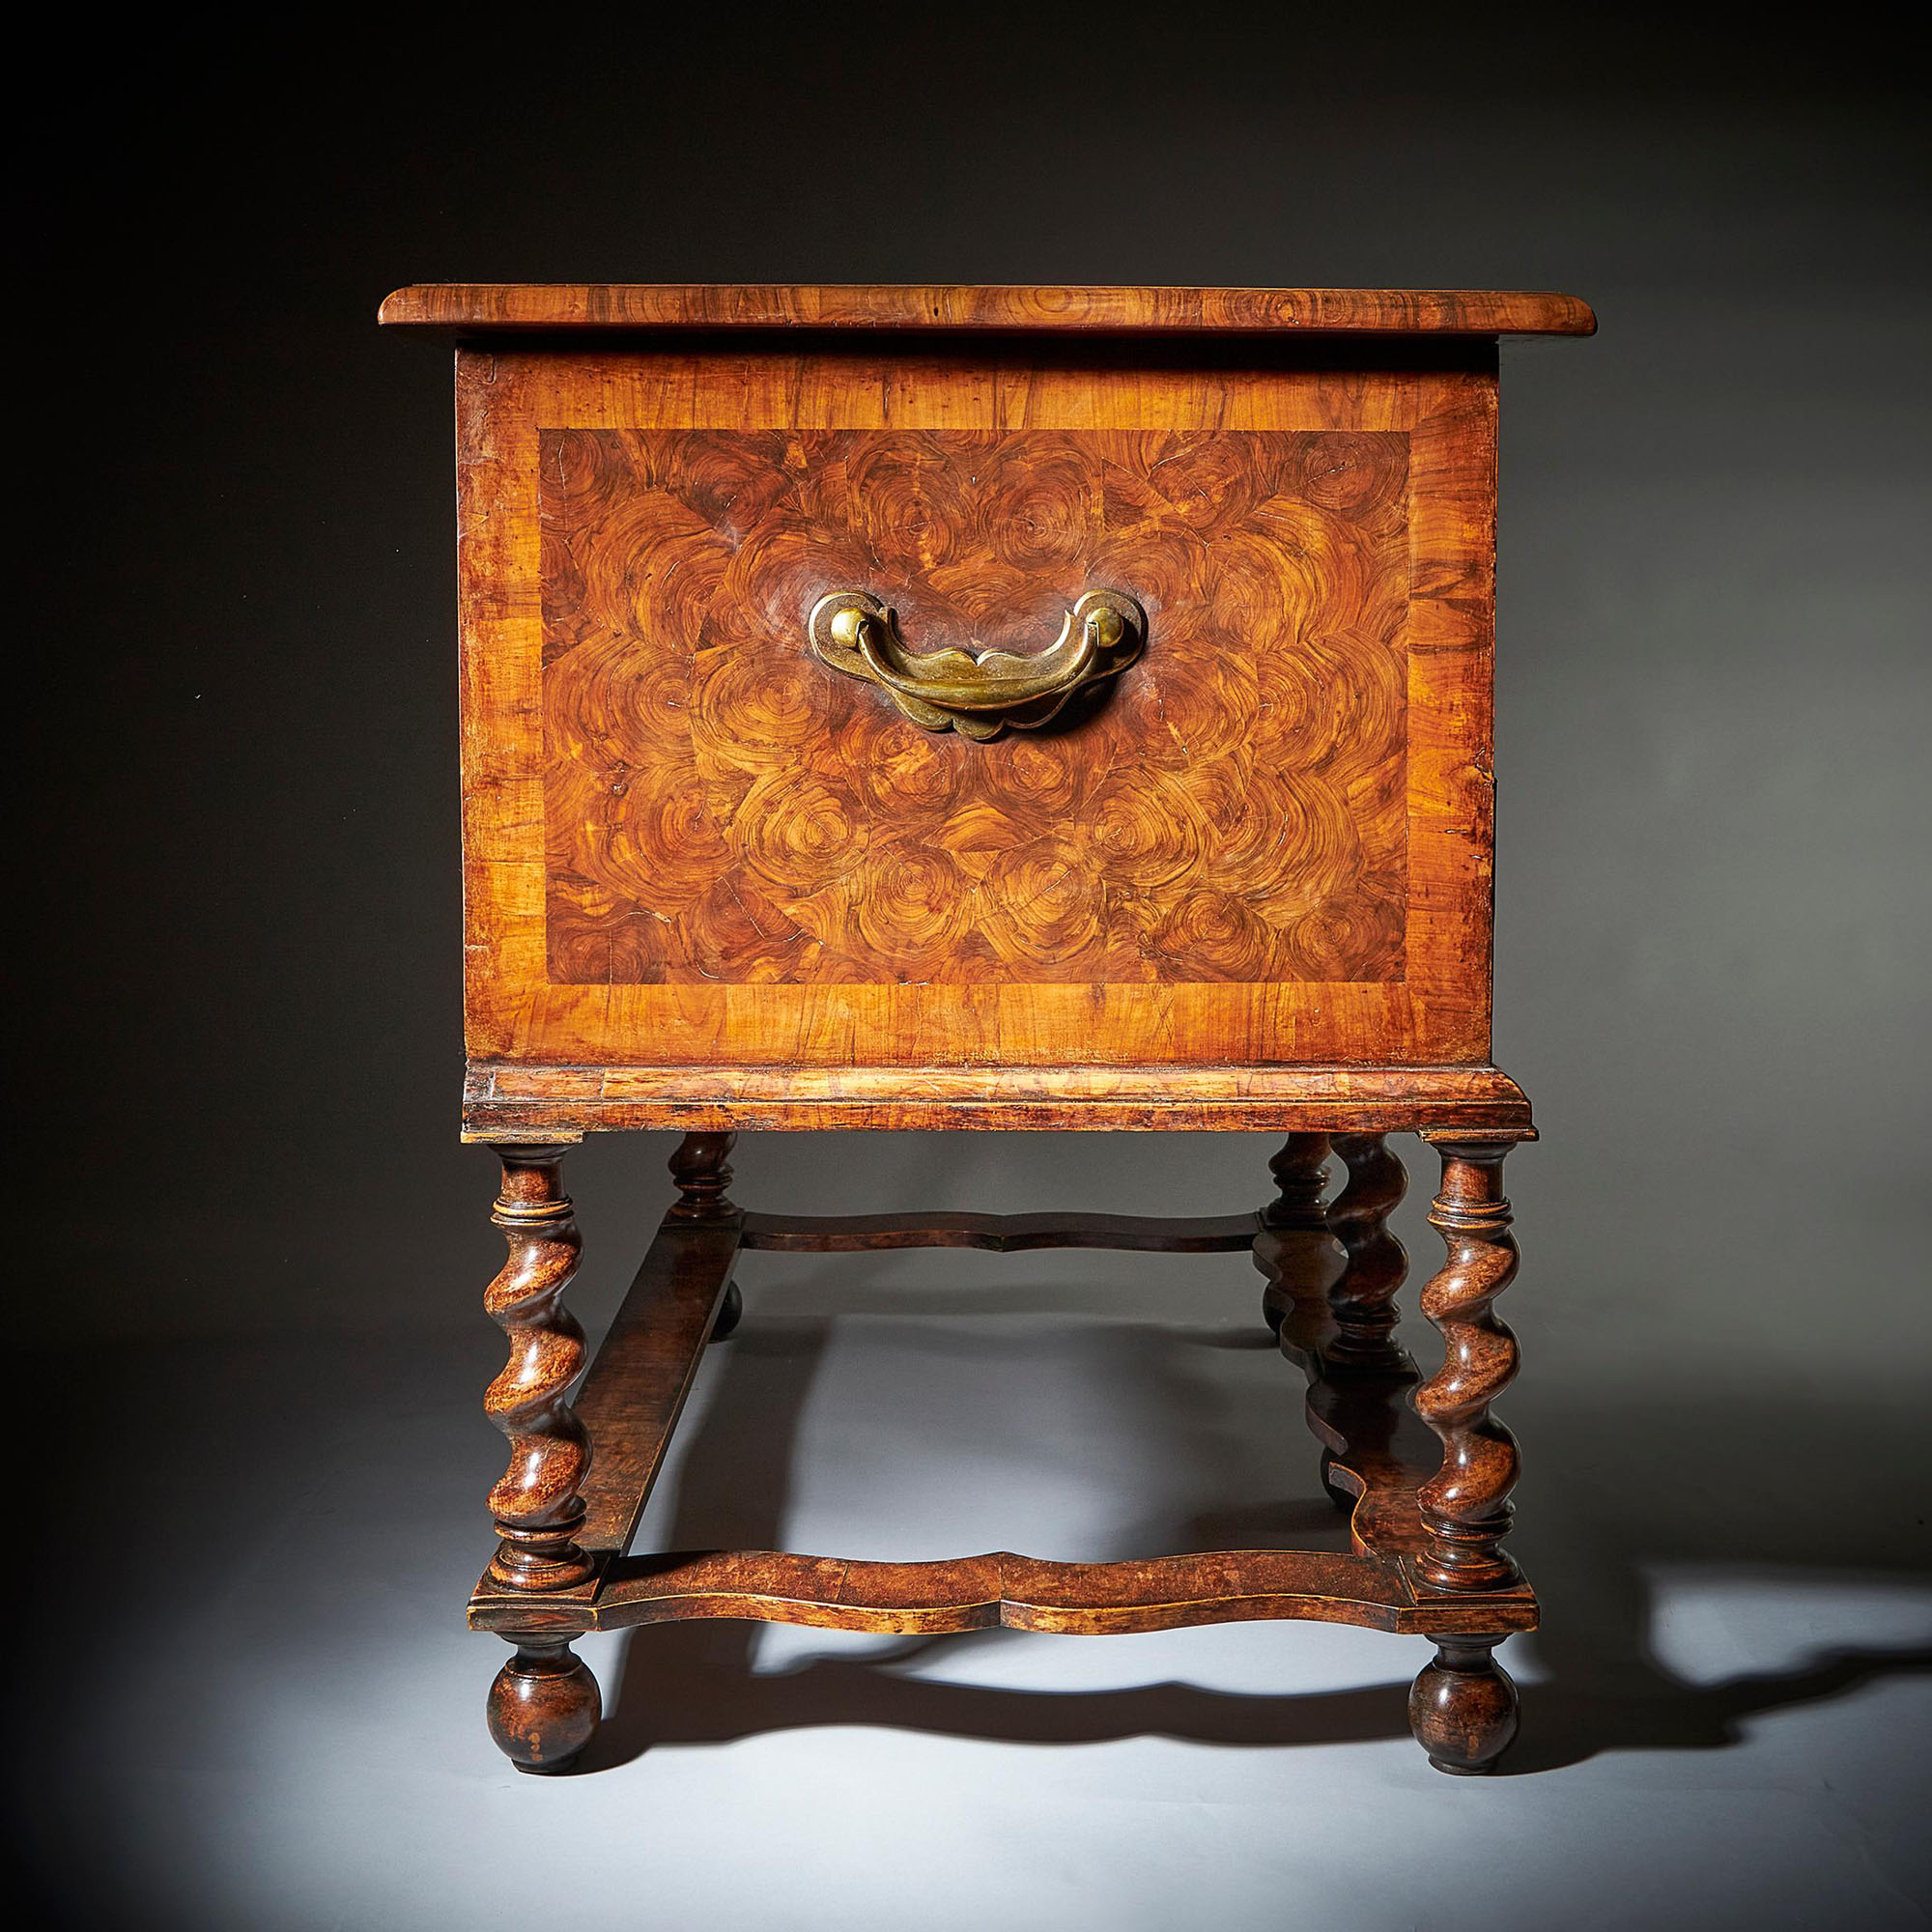 A fine and extremely rare 17th century William and Mary baroque olive oyster chest on stand or 'table box', circa 1675-1690. 4